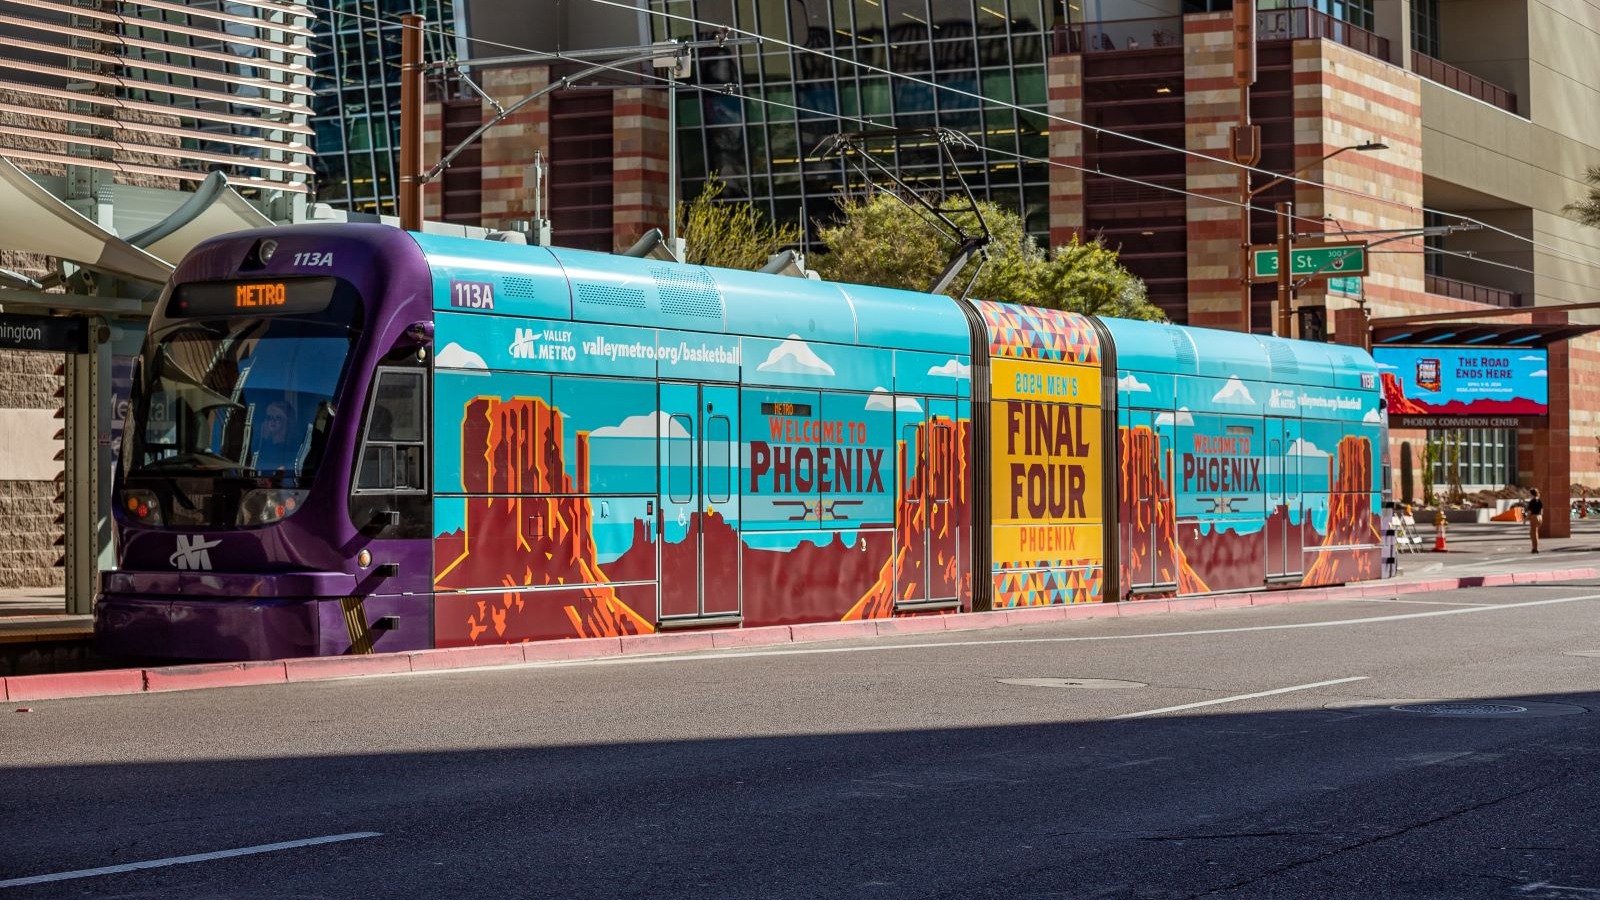 Phoenix, Valley Metro to provide free light rail rides for Final Four fans